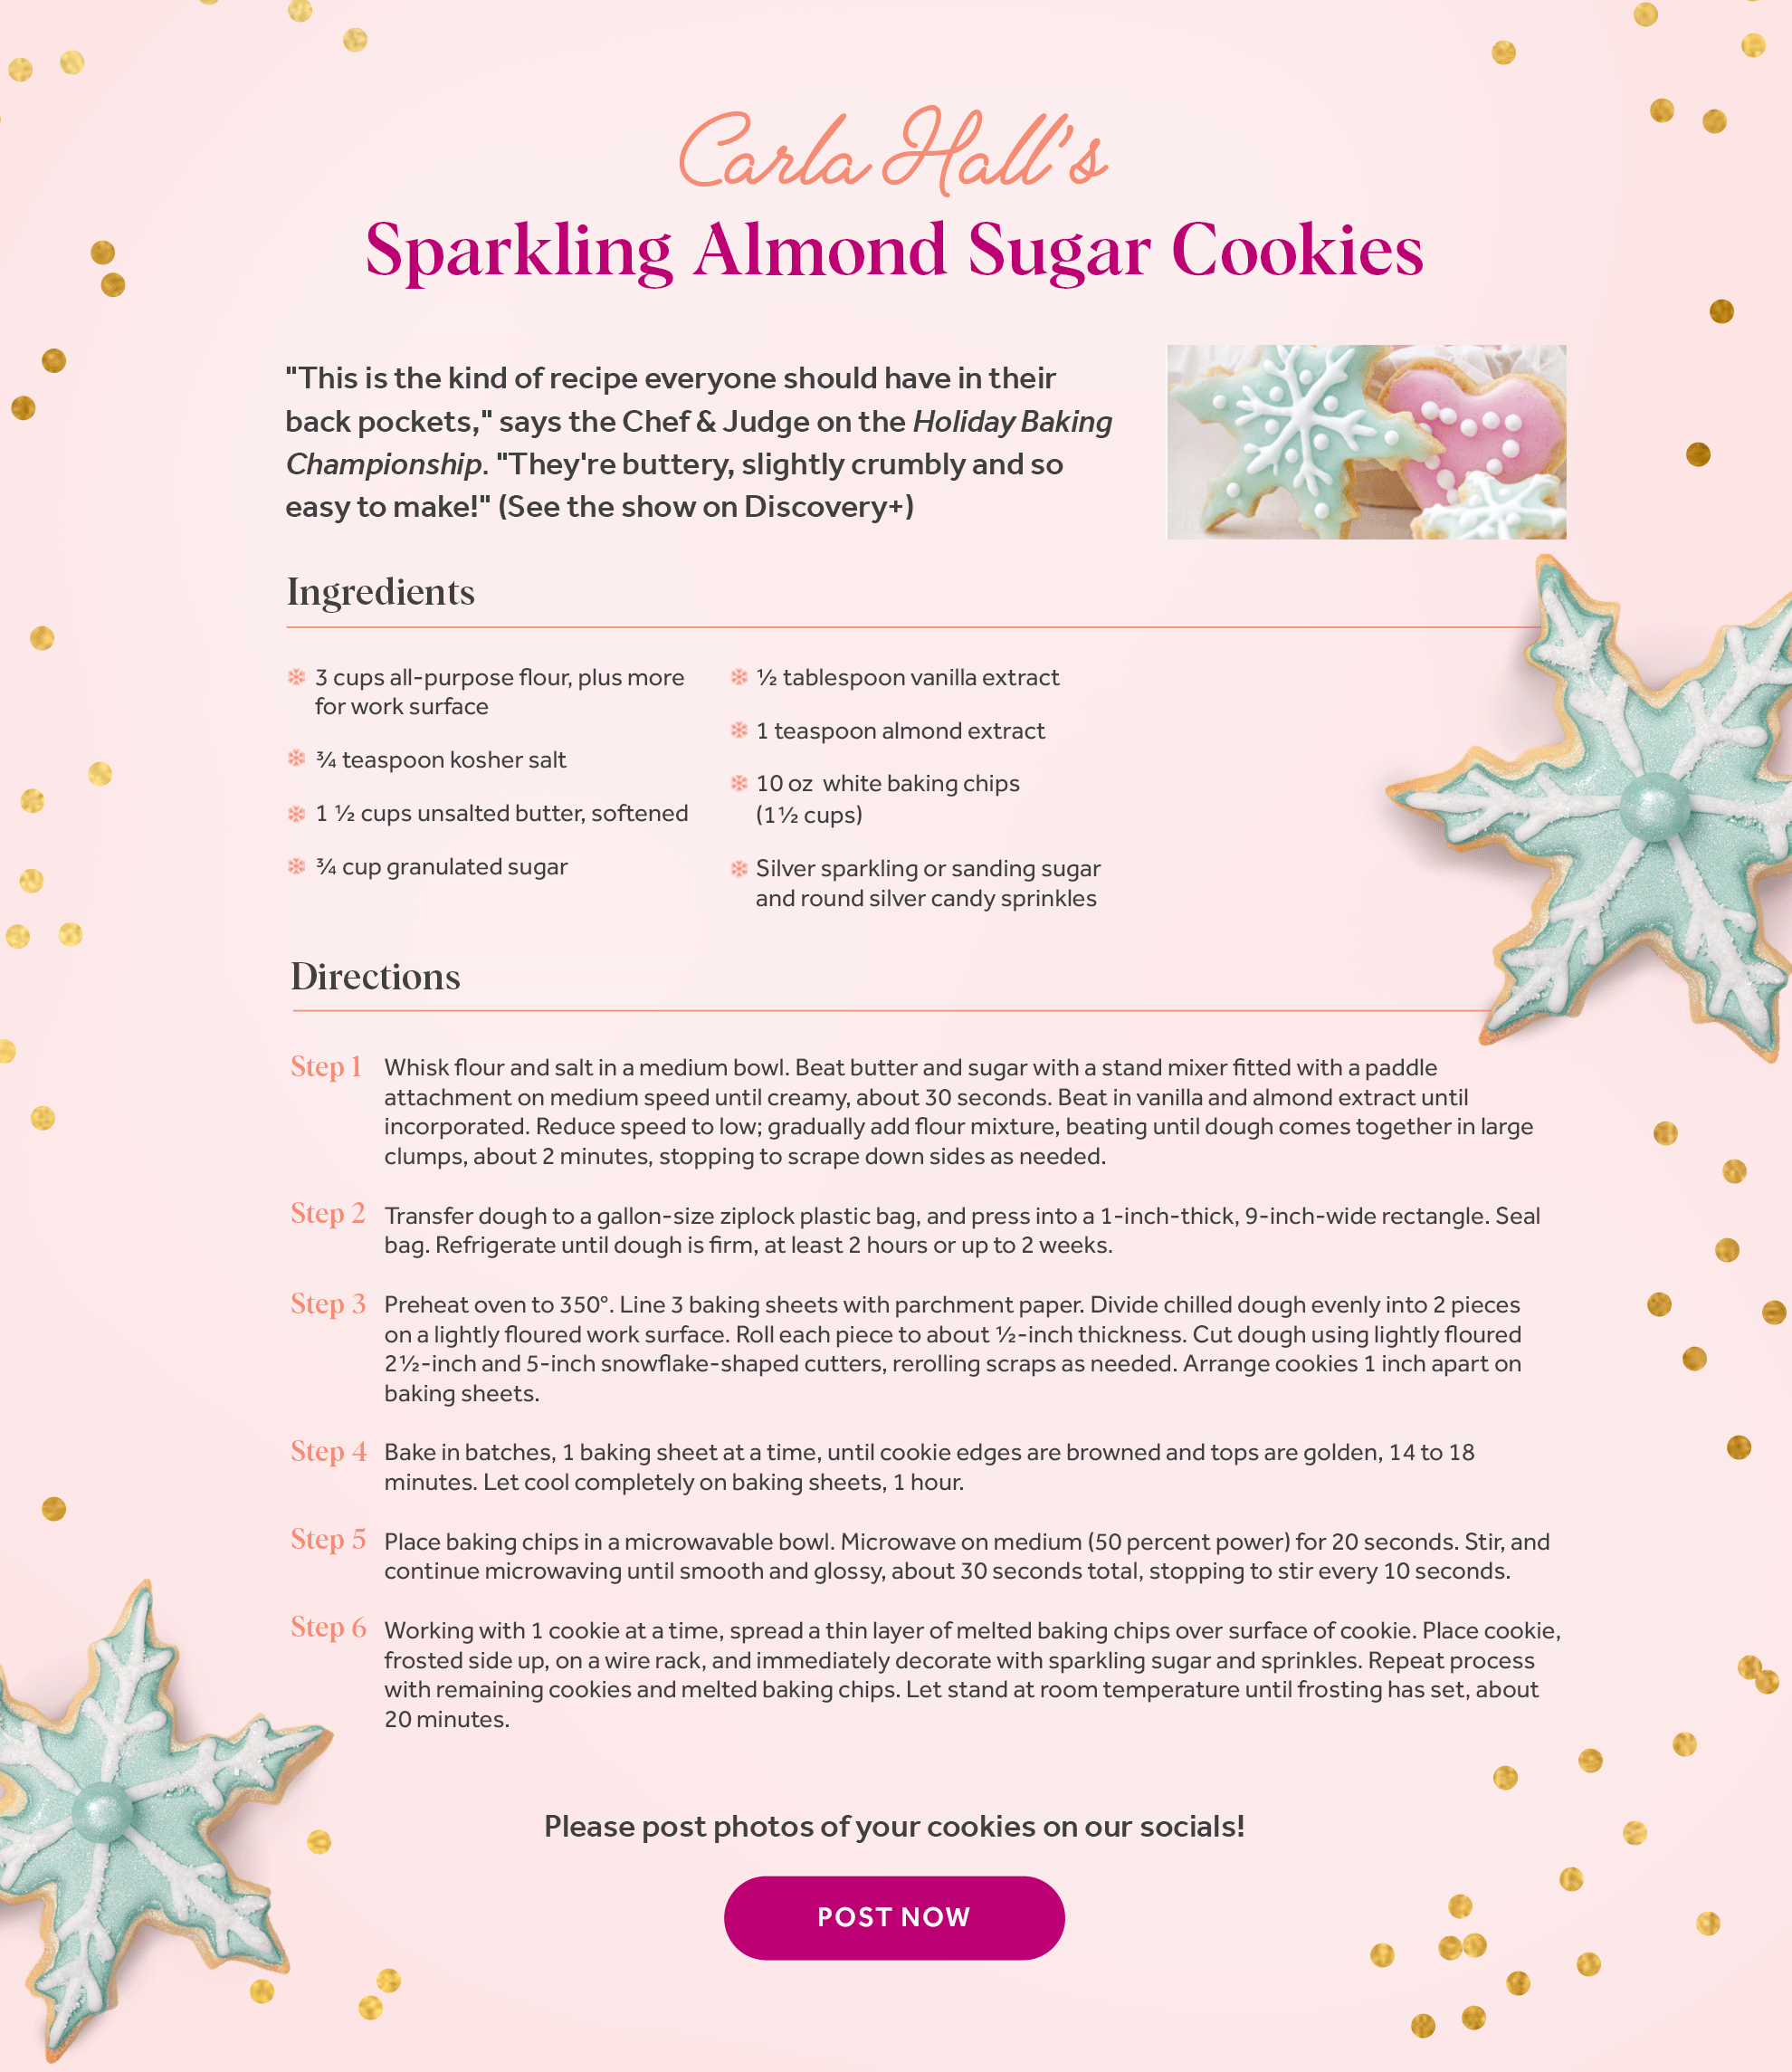 Carla Hall's Must Have Sparkling Almond Sugar Cookies